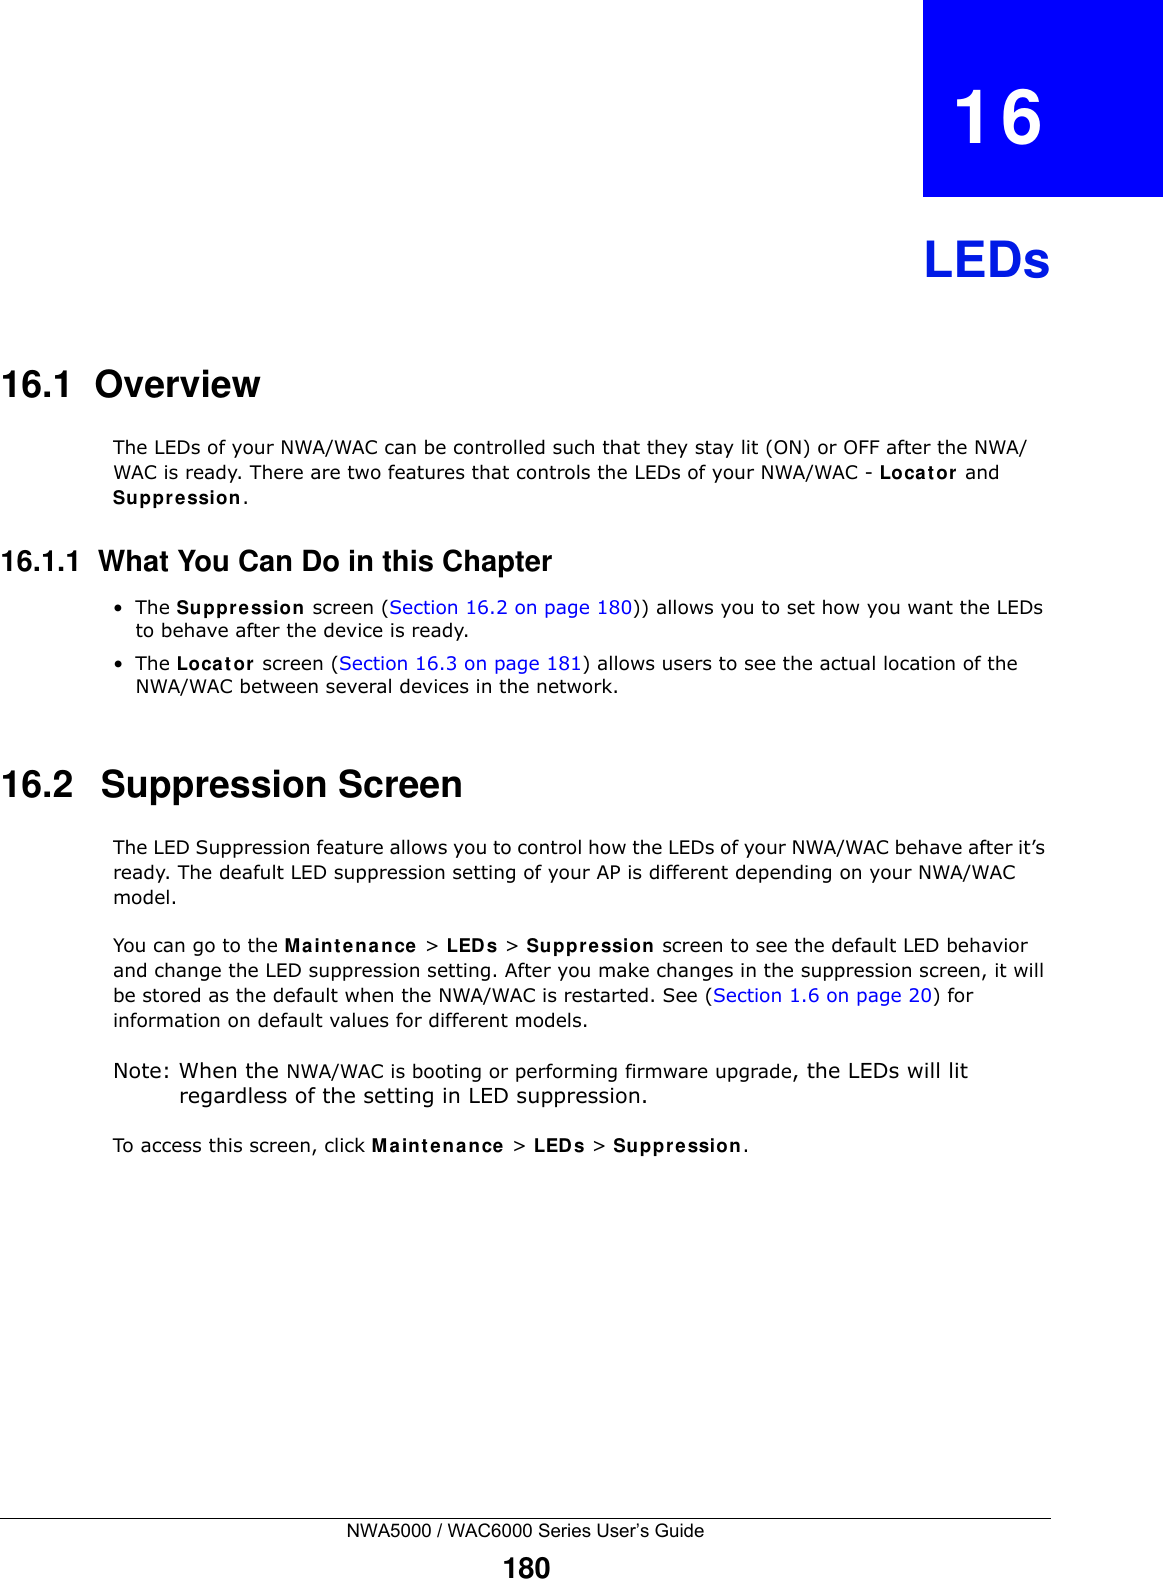 NWA5000 / WAC6000 Series User’s Guide180CHAPTER   16LEDs16.1  OverviewThe LEDs of your NWA/WAC can be controlled such that they stay lit (ON) or OFF after the NWA/WAC is ready. There are two features that controls the LEDs of your NWA/WAC - Locator and Suppression.16.1.1  What You Can Do in this Chapter•The Suppression screen (Section 16.2 on page 180)) allows you to set how you want the LEDs to behave after the device is ready. •The Locator screen (Section 16.3 on page 181) allows users to see the actual location of the NWA/WAC between several devices in the network.16.2   Suppression Screen The LED Suppression feature allows you to control how the LEDs of your NWA/WAC behave after it’s ready. The deafult LED suppression setting of your AP is different depending on your NWA/WAC model. You can go to the Maintenance &gt; LEDs &gt; Suppression screen to see the default LED behavior and change the LED suppression setting. After you make changes in the suppression screen, it will be stored as the default when the NWA/WAC is restarted. See (Section 1.6 on page 20) for information on default values for different models.Note: When the NWA/WAC is booting or performing firmware upgrade, the LEDs will lit regardless of the setting in LED suppression.To access this screen, click Maintenance &gt; LEDs &gt; Suppression.